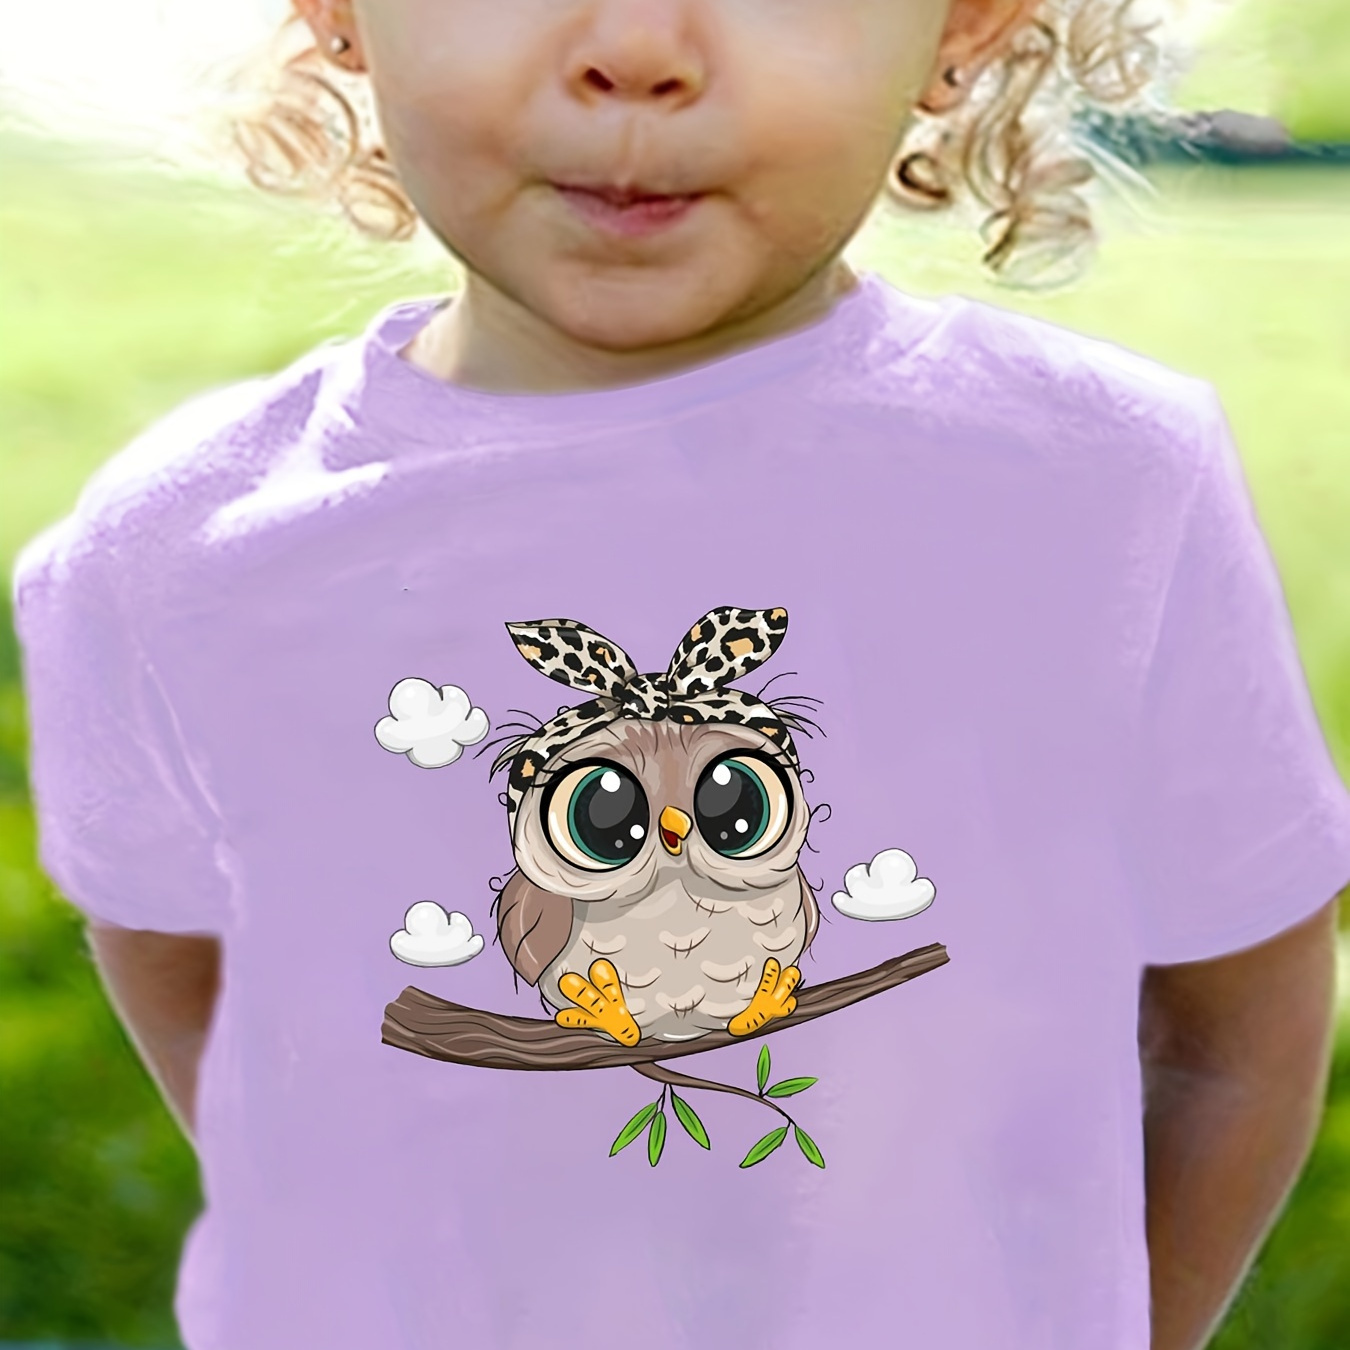 

100% Cotton Girls Owl Print Short Sleeve Crew Neck T-shirt Summer Clothes Party Gift Everyday Toddler Girls